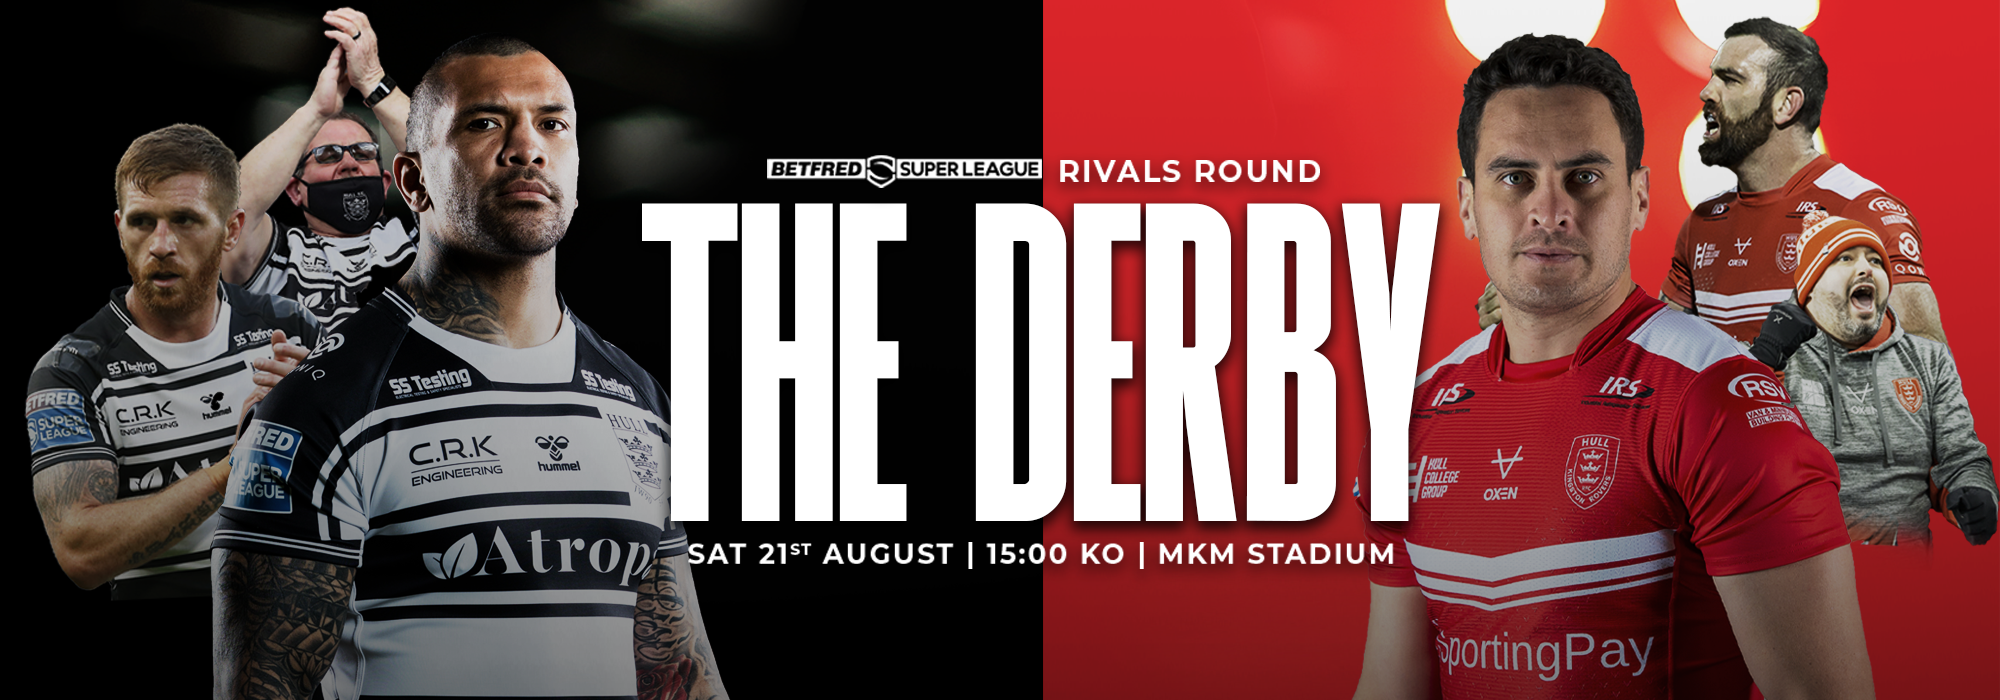 The Derby Is Back – Ticket Information